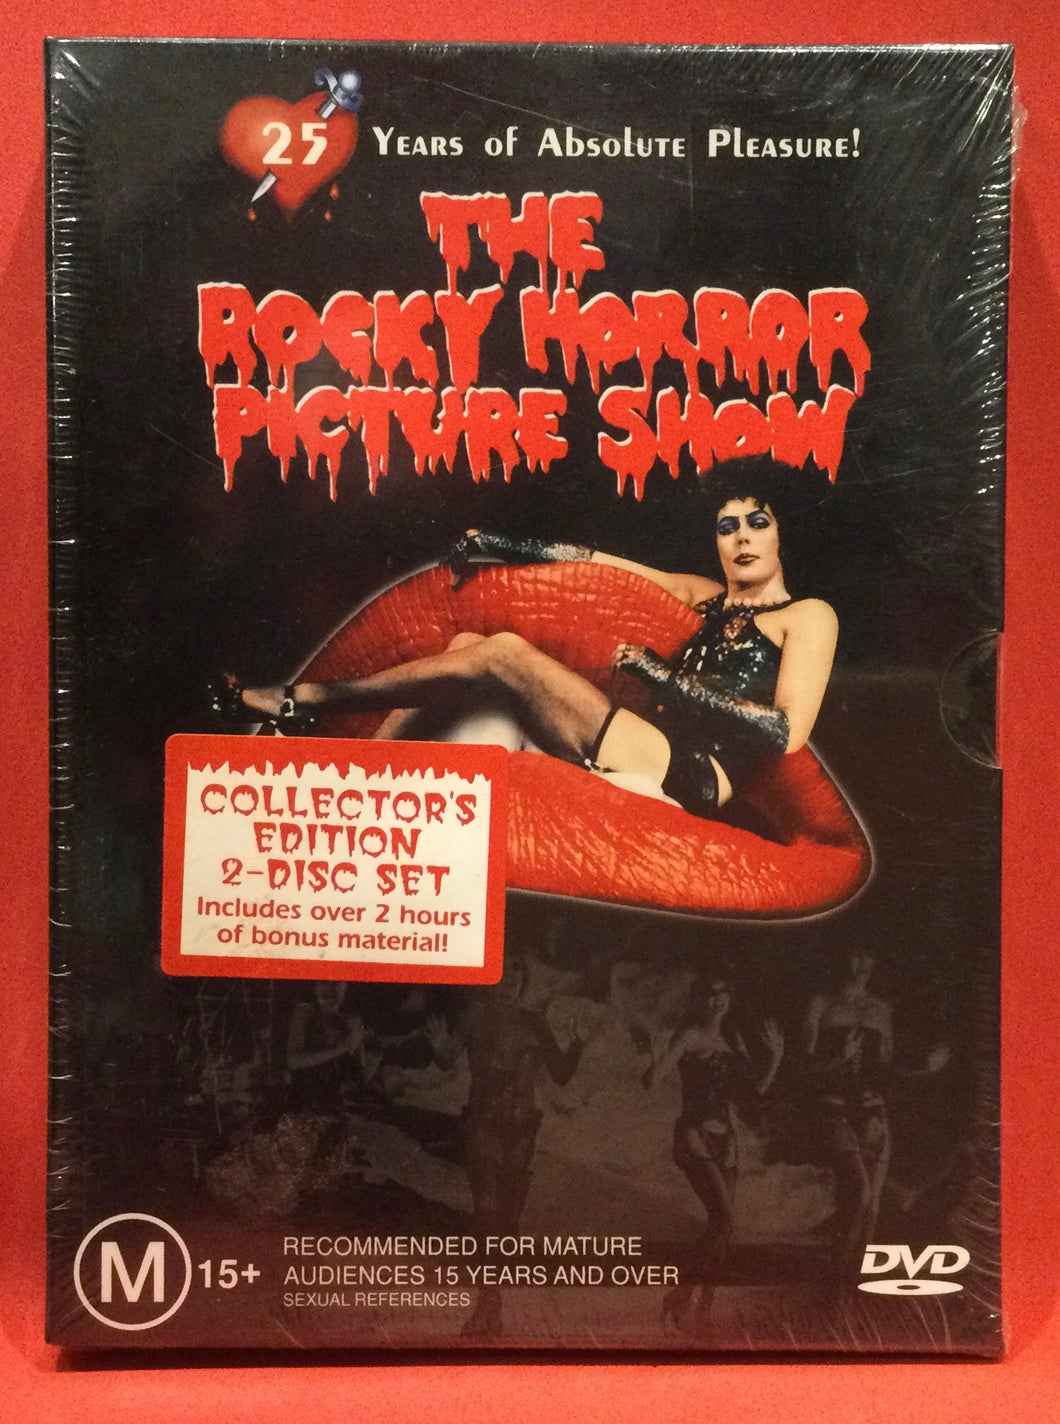 ROCKY HORROR PICTURE SHOW - 25TH ANNIVERSARY - COLLECTOR'S EDITION DVD (SEALED)